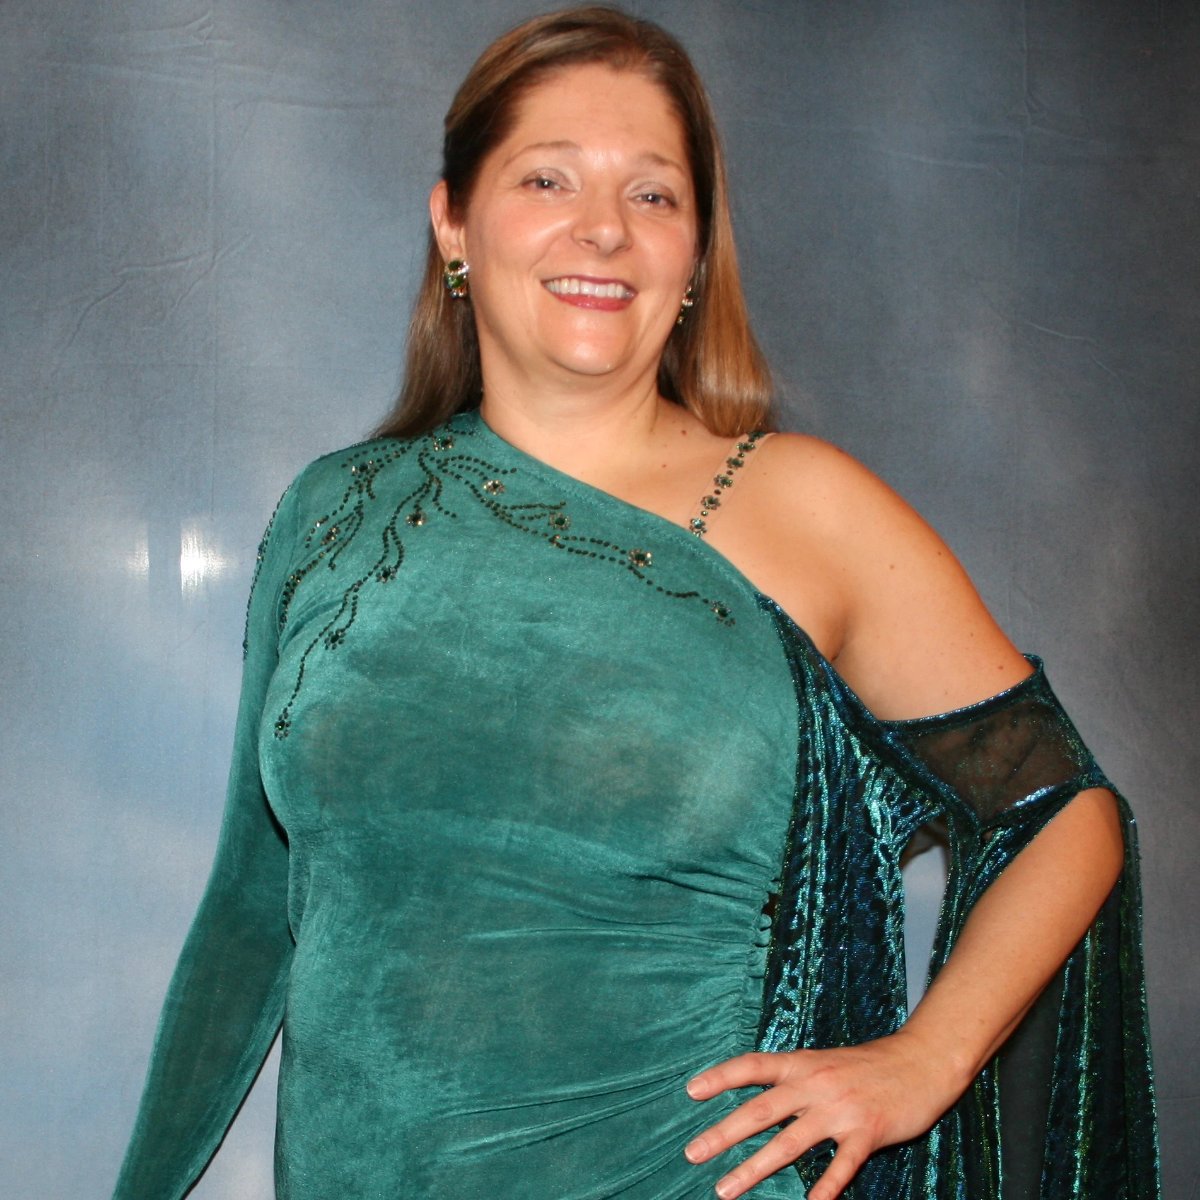 Crystal's Creations close up view of Plus size teal Latin/rhythm dress or tango dress was created in luxurious teal solid slinky with iridescent floats & flounces plus a few champagne sequined flounces at bottom skirting. It is embellished with finely detailed Swarovski stonework in blue zircon, blue zircon AB and emerald gren